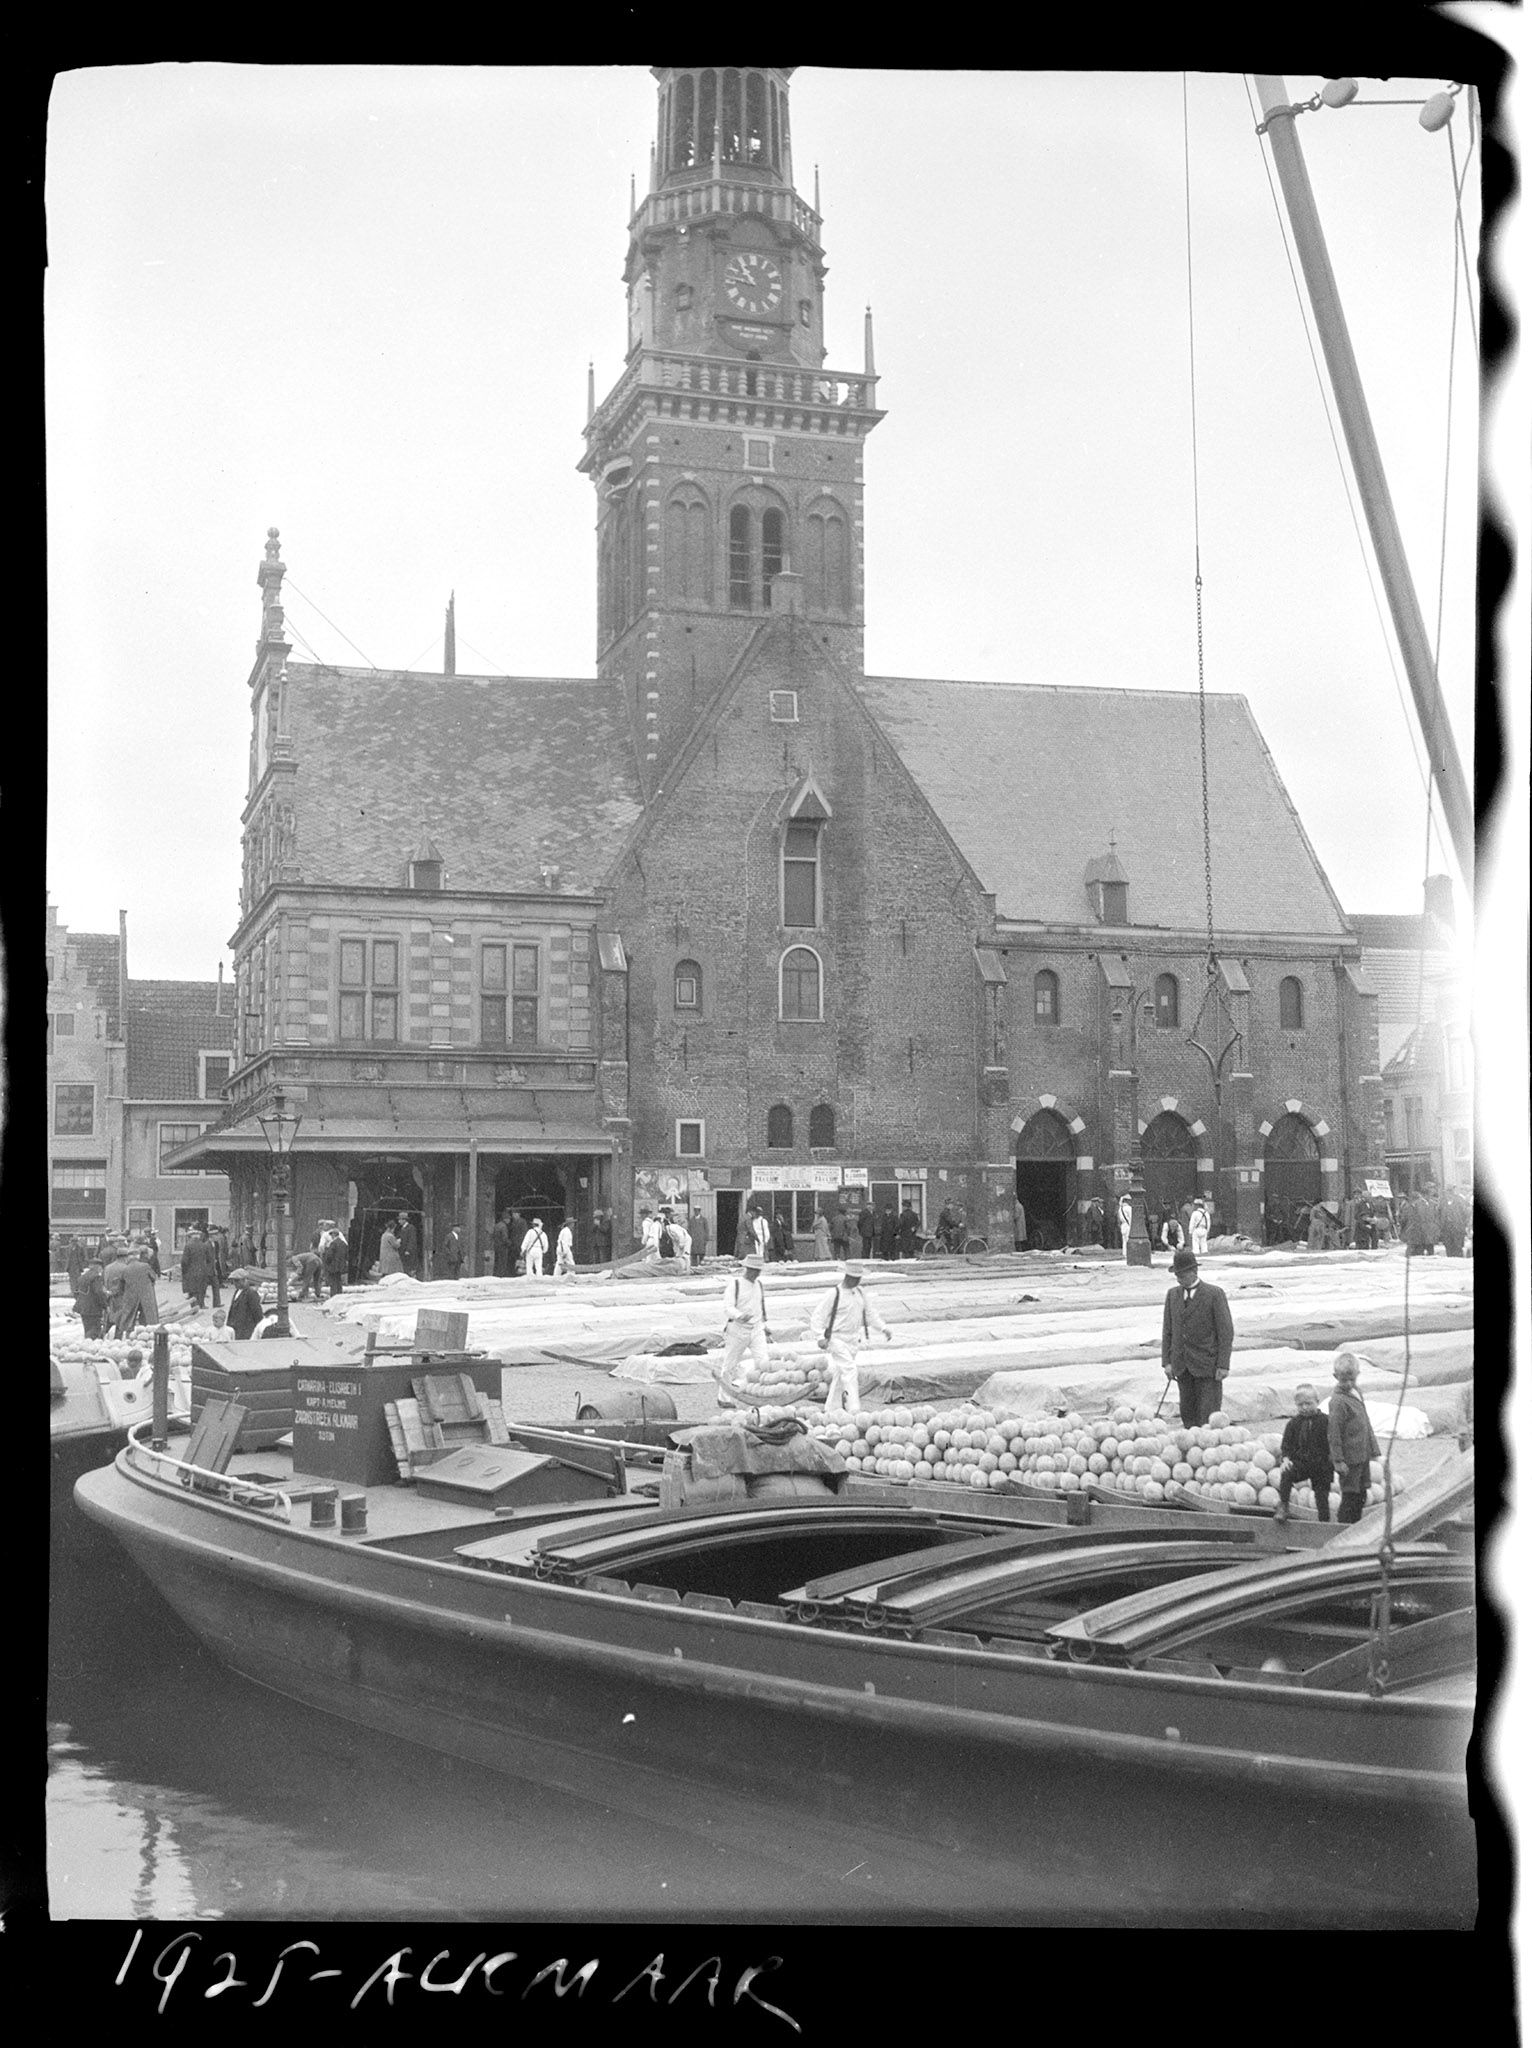 Boats docked outside the Waagplein (“waag” meaning weigh or weigh scale, and “plein” meaning a square in a park). Cheeses line the ground.